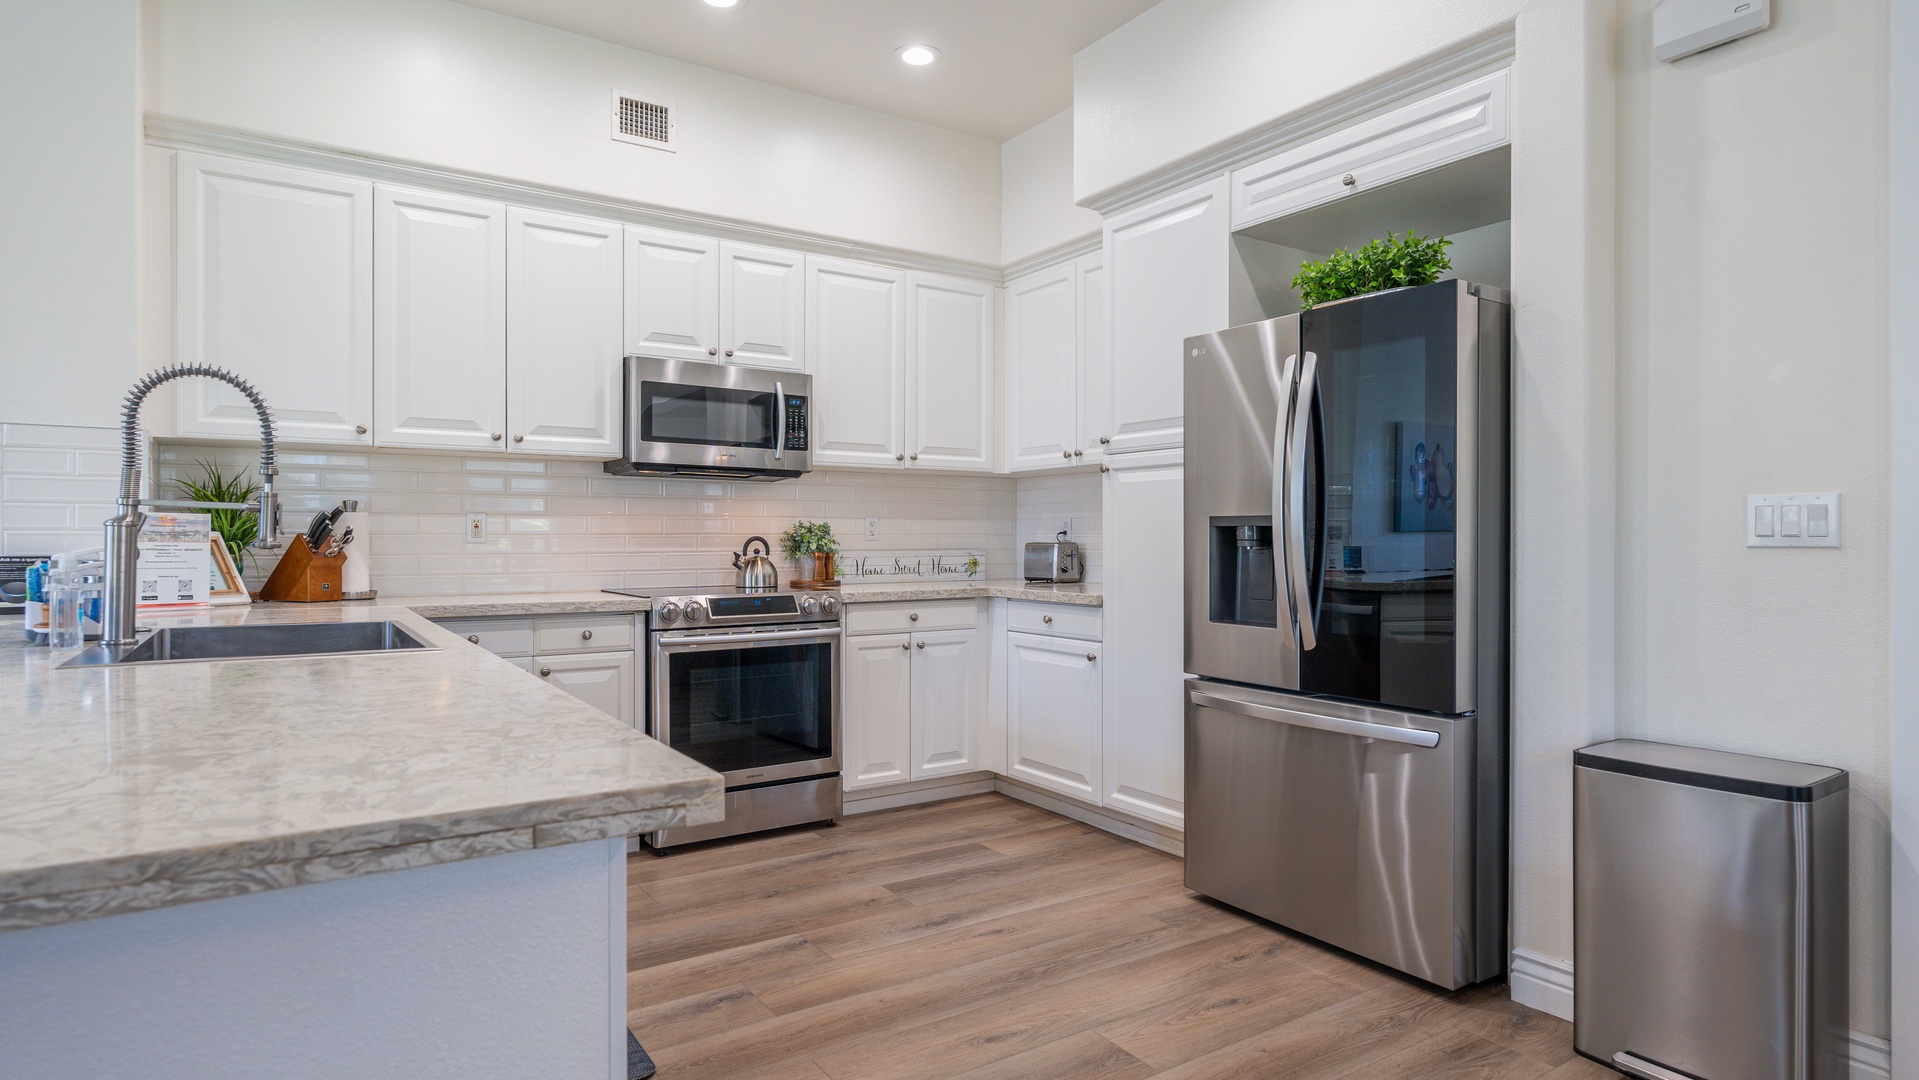 Kapolei Vacation Rentals, Coconut Plantation 1078-1 - The kitchen is equipped with stainless steel appliances for your culinary adventures.